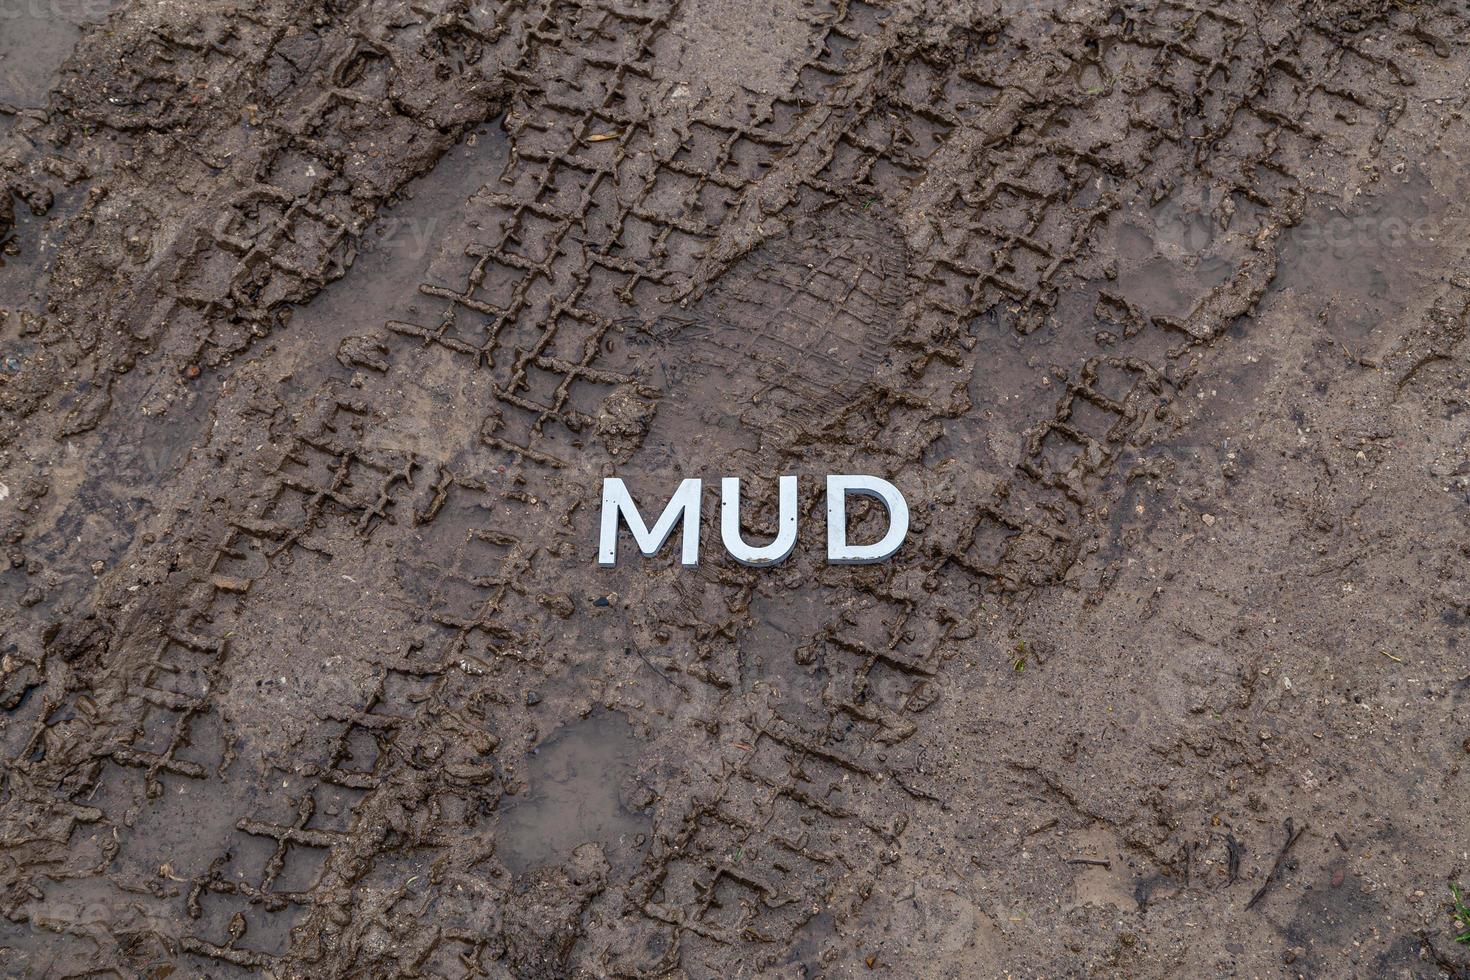 the word mud laid with silver metal letters on wet dirt surface photo